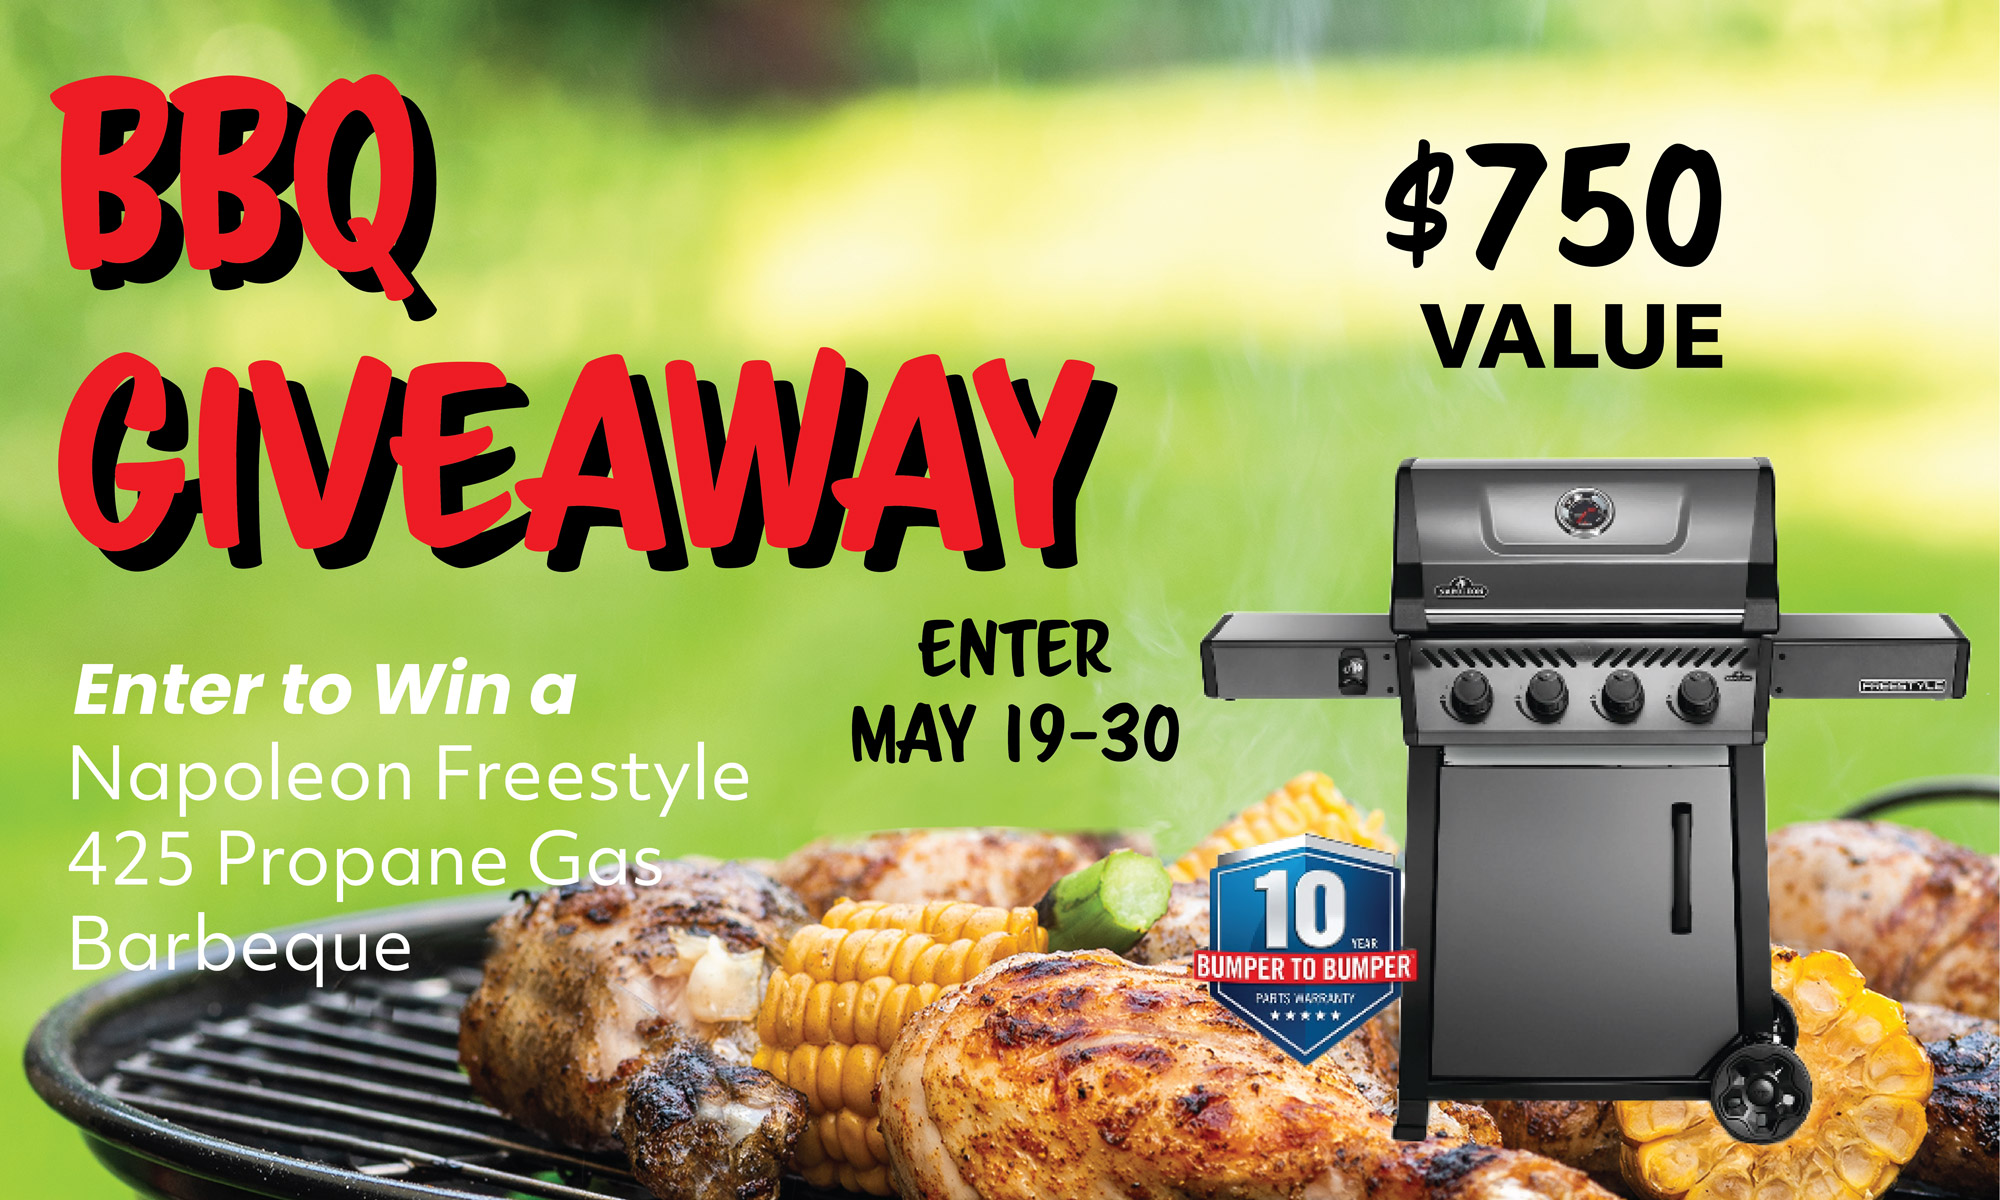 Enter To Win A BBQ! Enter our giveaway for a chance to win a Napoleon Freestyle 425 Propane Gas Barbeque!